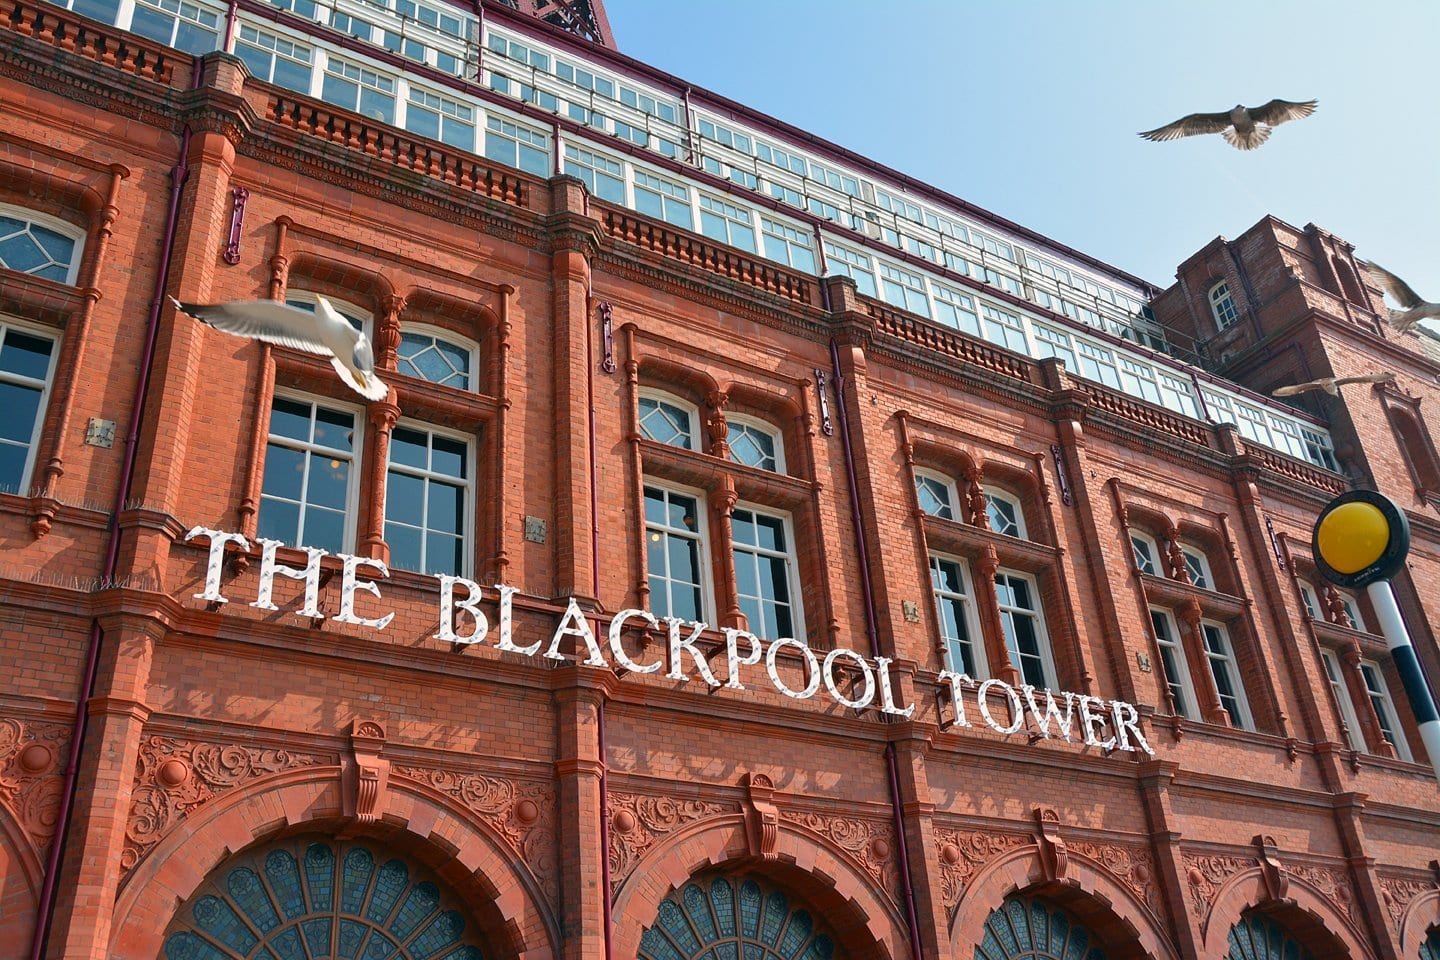 The Blackpool Tower. The Blackpool Resort Ambassador Academy will provide opportunity for unemployed young people and create a warm welcome to the resort.